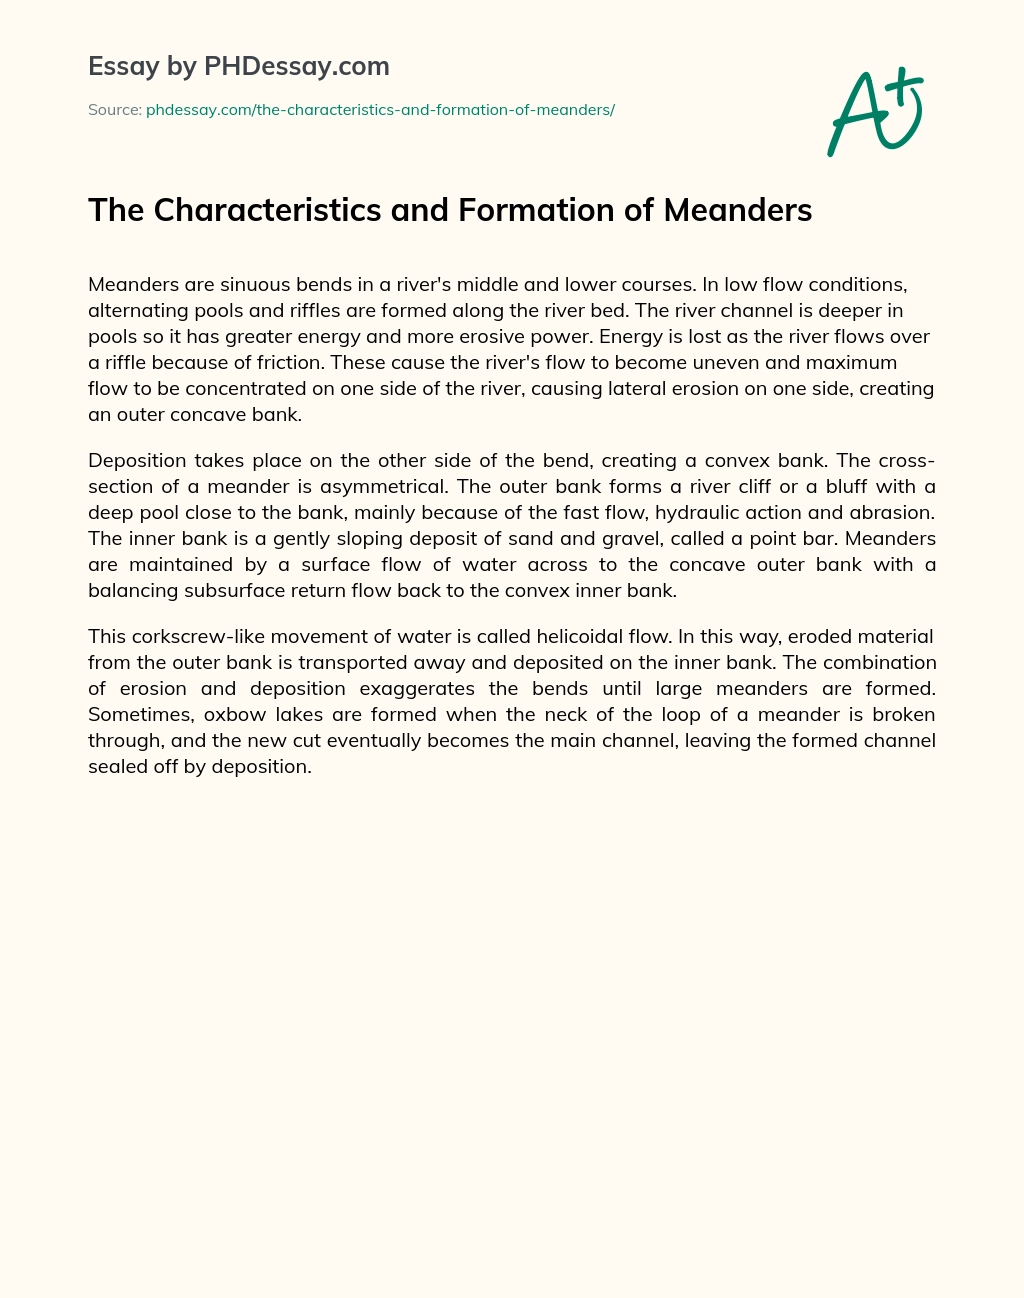 The Characteristics and Formation of Meanders essay